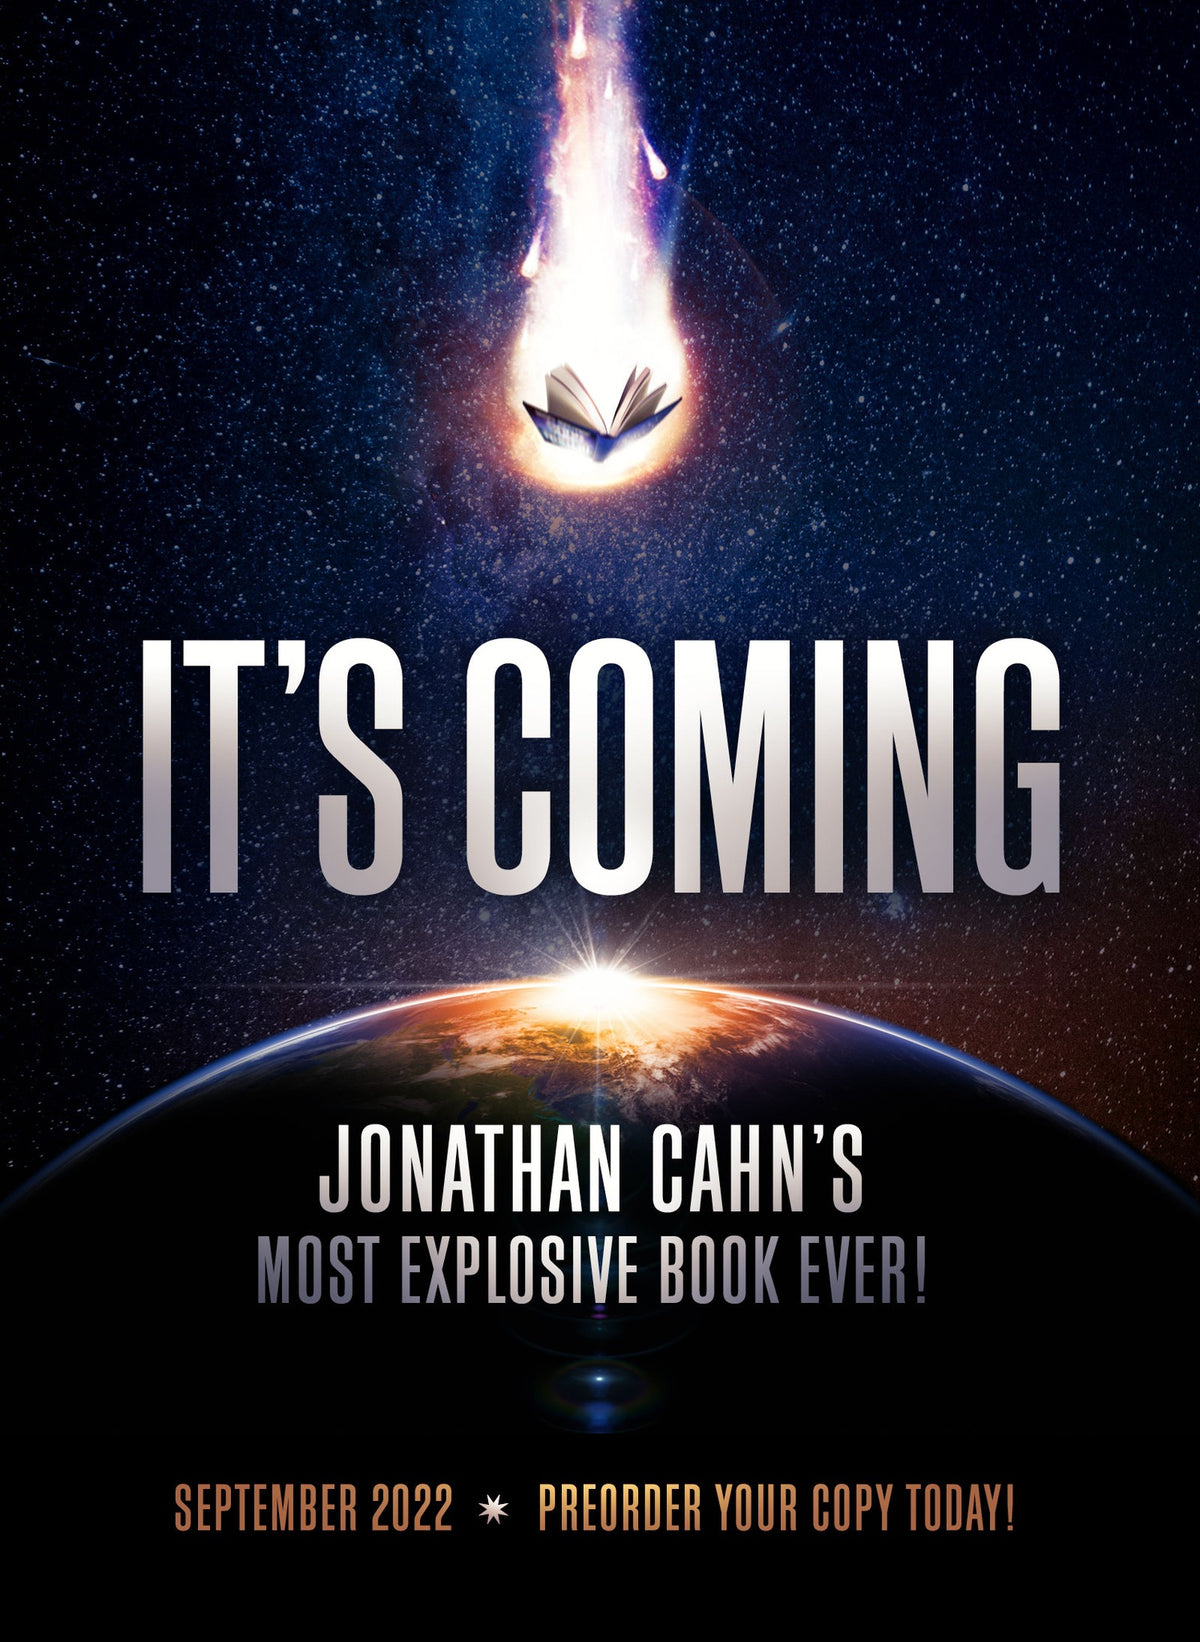 Jonathan Cahn to release most explosive book yet, ‘The Return of the G